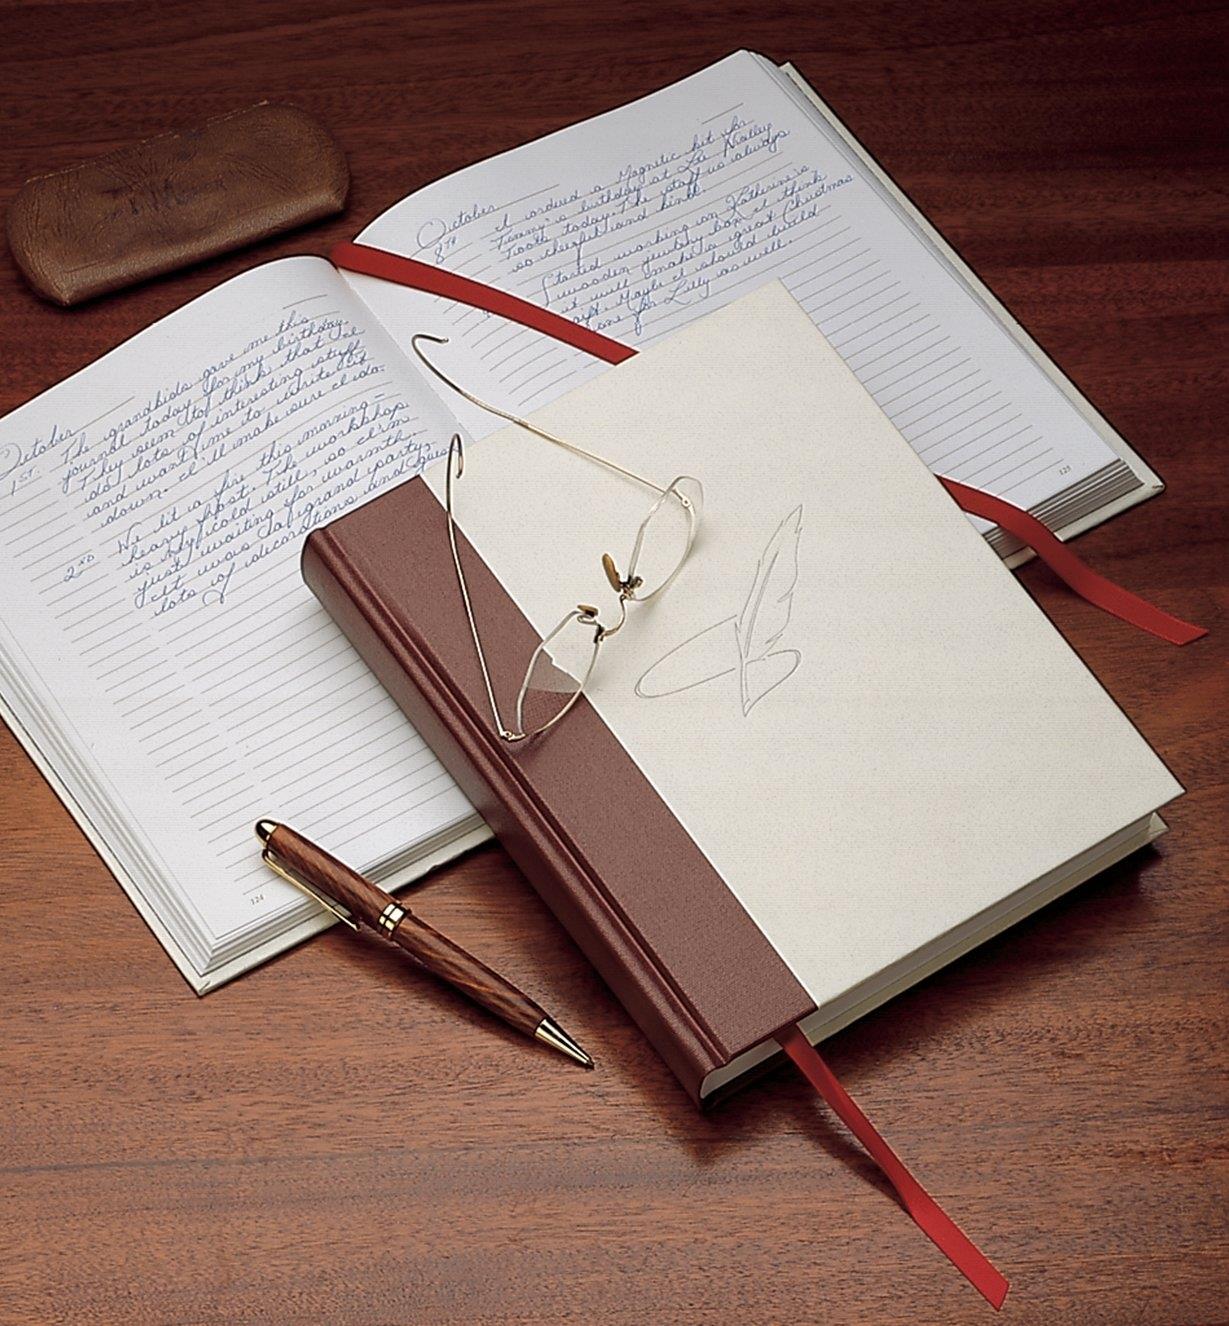 A pair of glasses and a pen resting on a closed Everyman's Journal lying on an open journal with writing on the pages